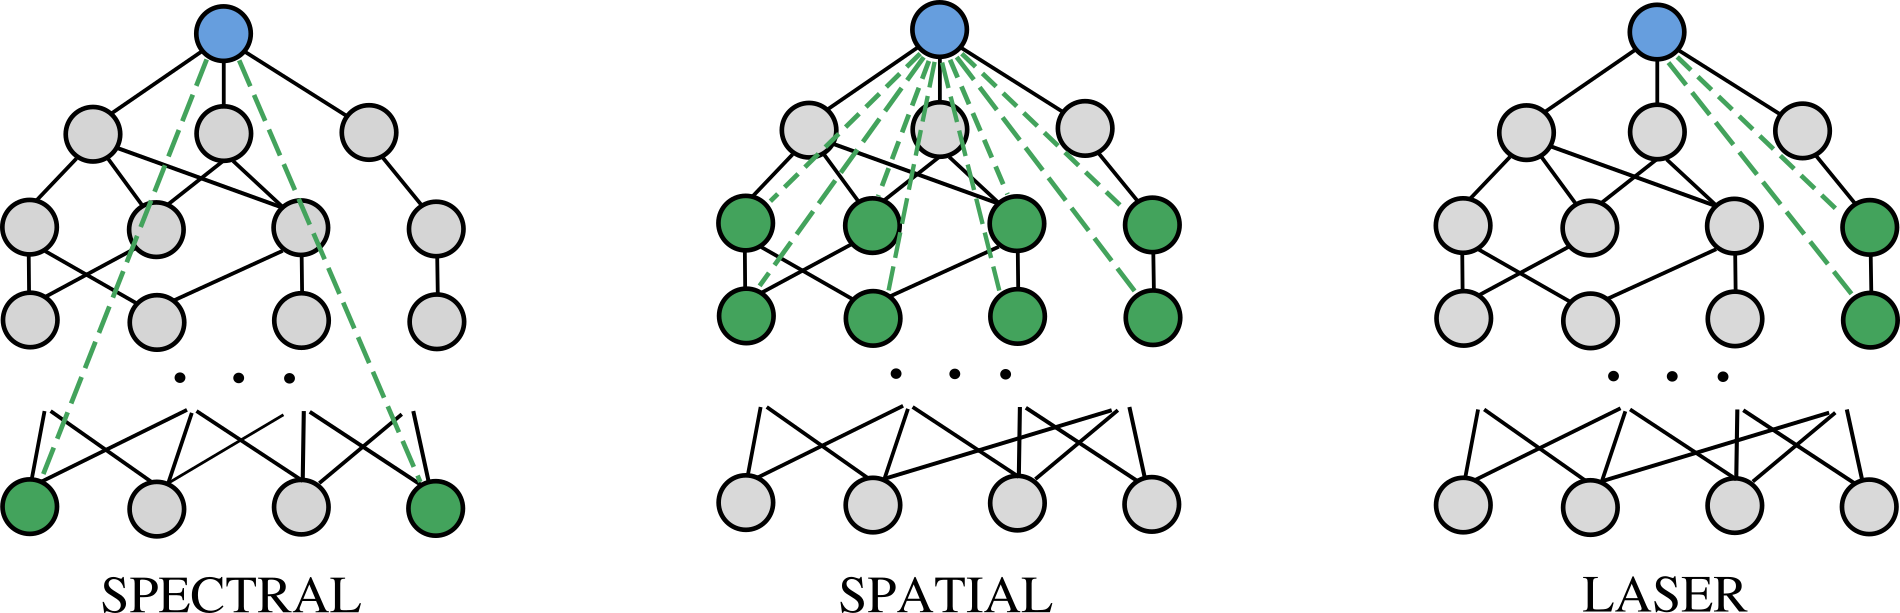 Locality-Aware Graph-Rewiring in GNNs